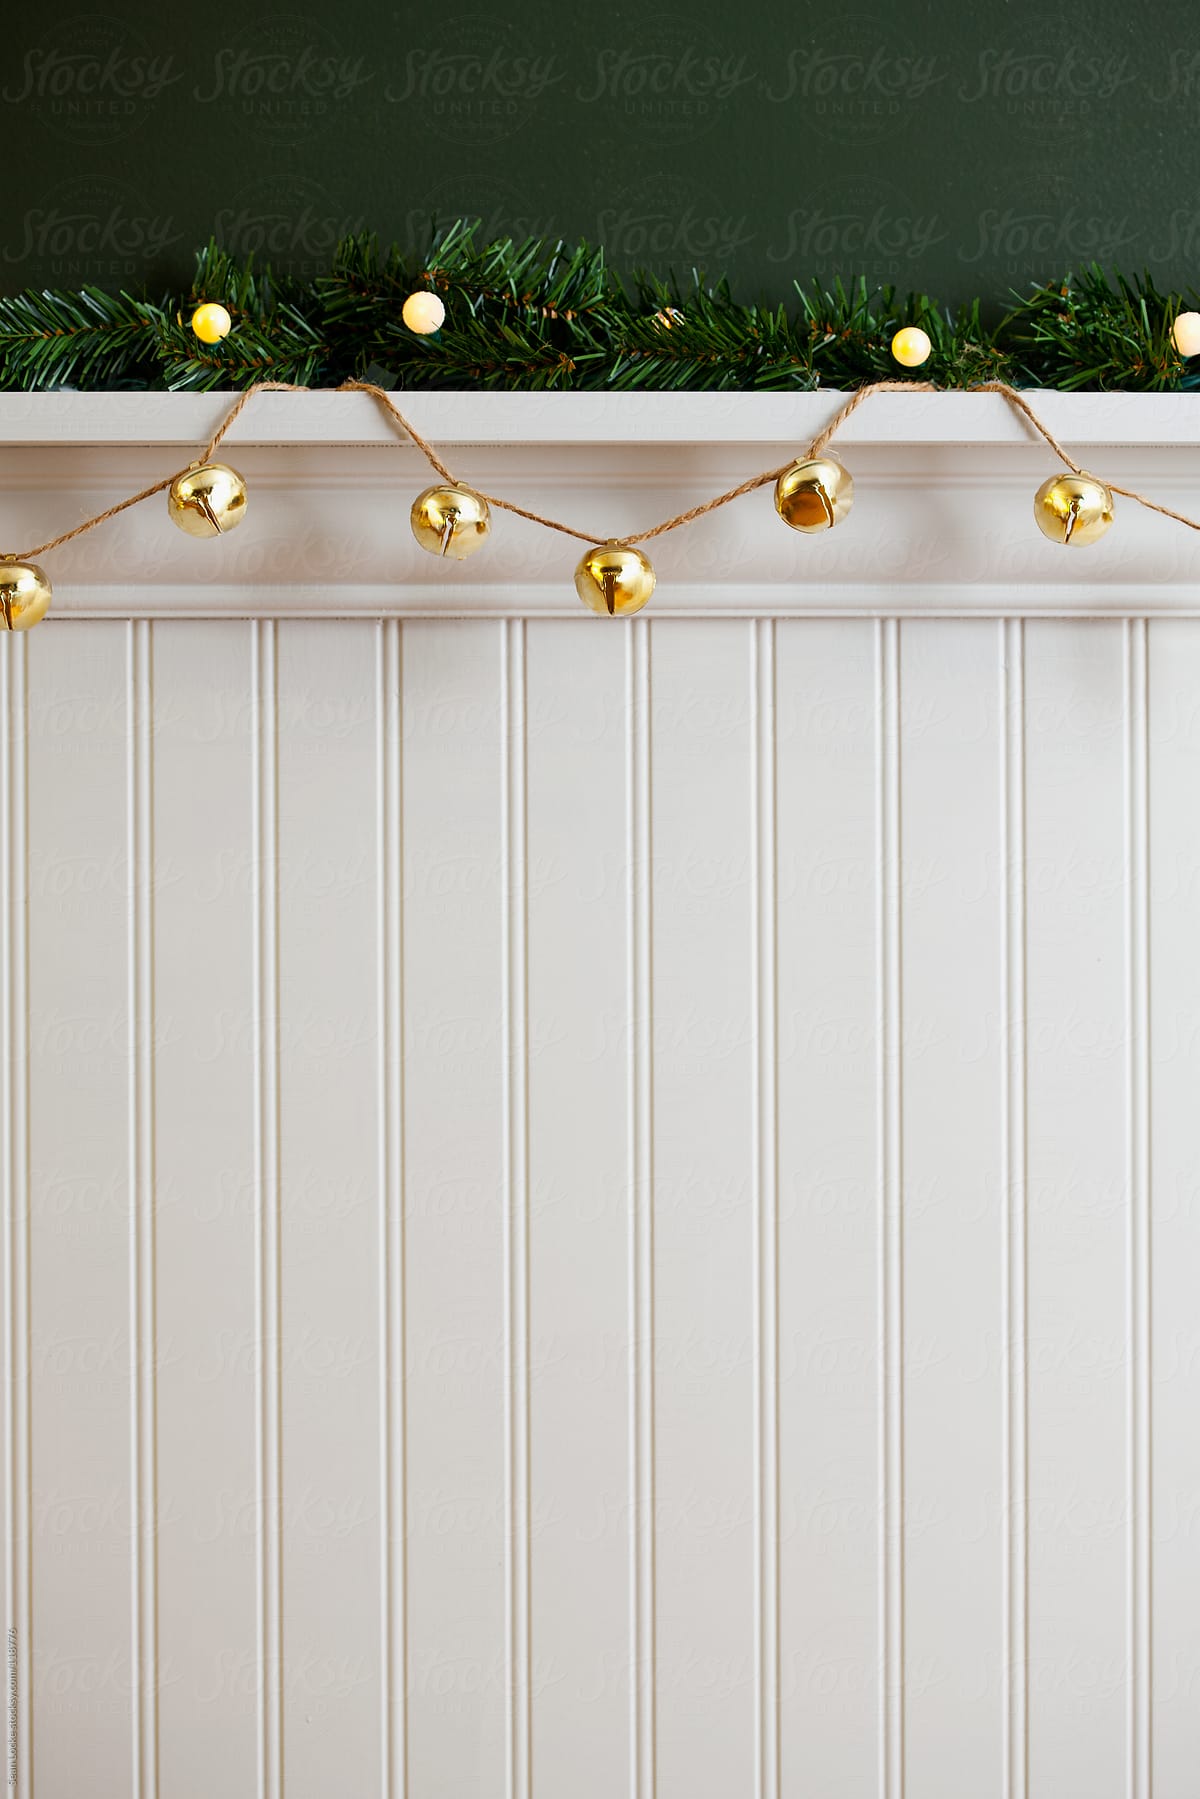 Holidays: Brass Bell Decorations Hanging With Garland